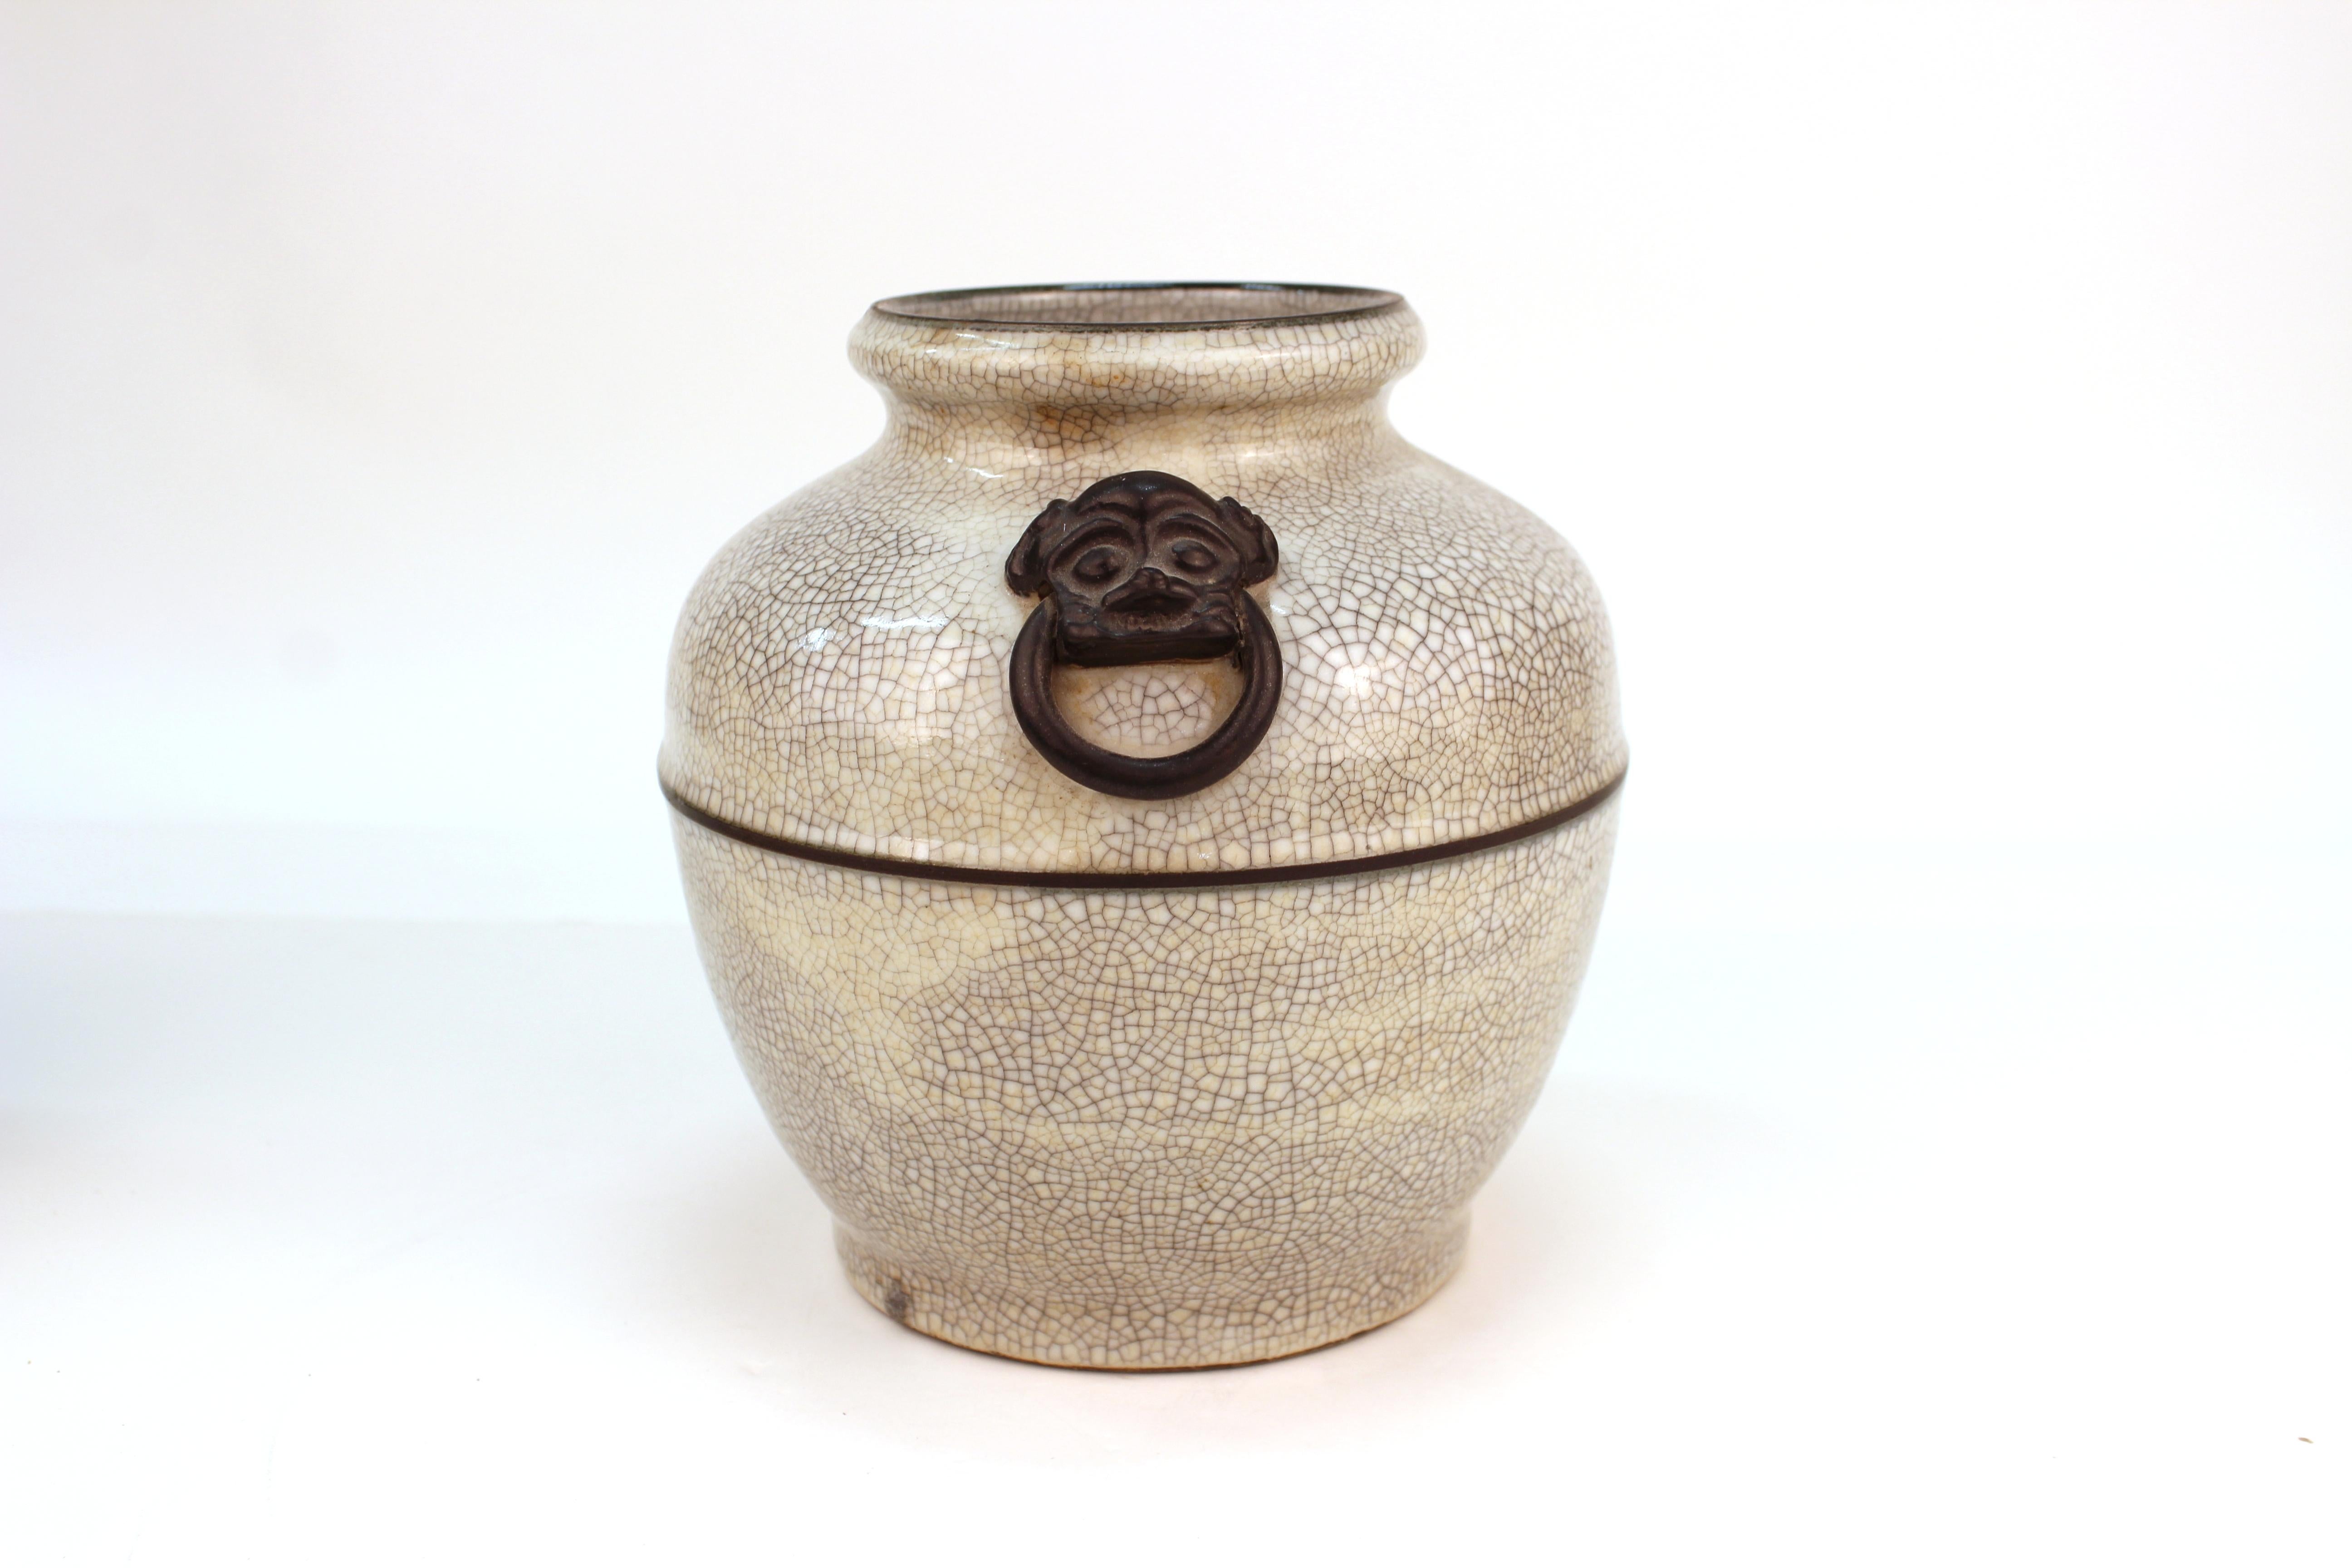 20th Century Pair of Asian Style Ceramic Jars or Urns with Metal Handles